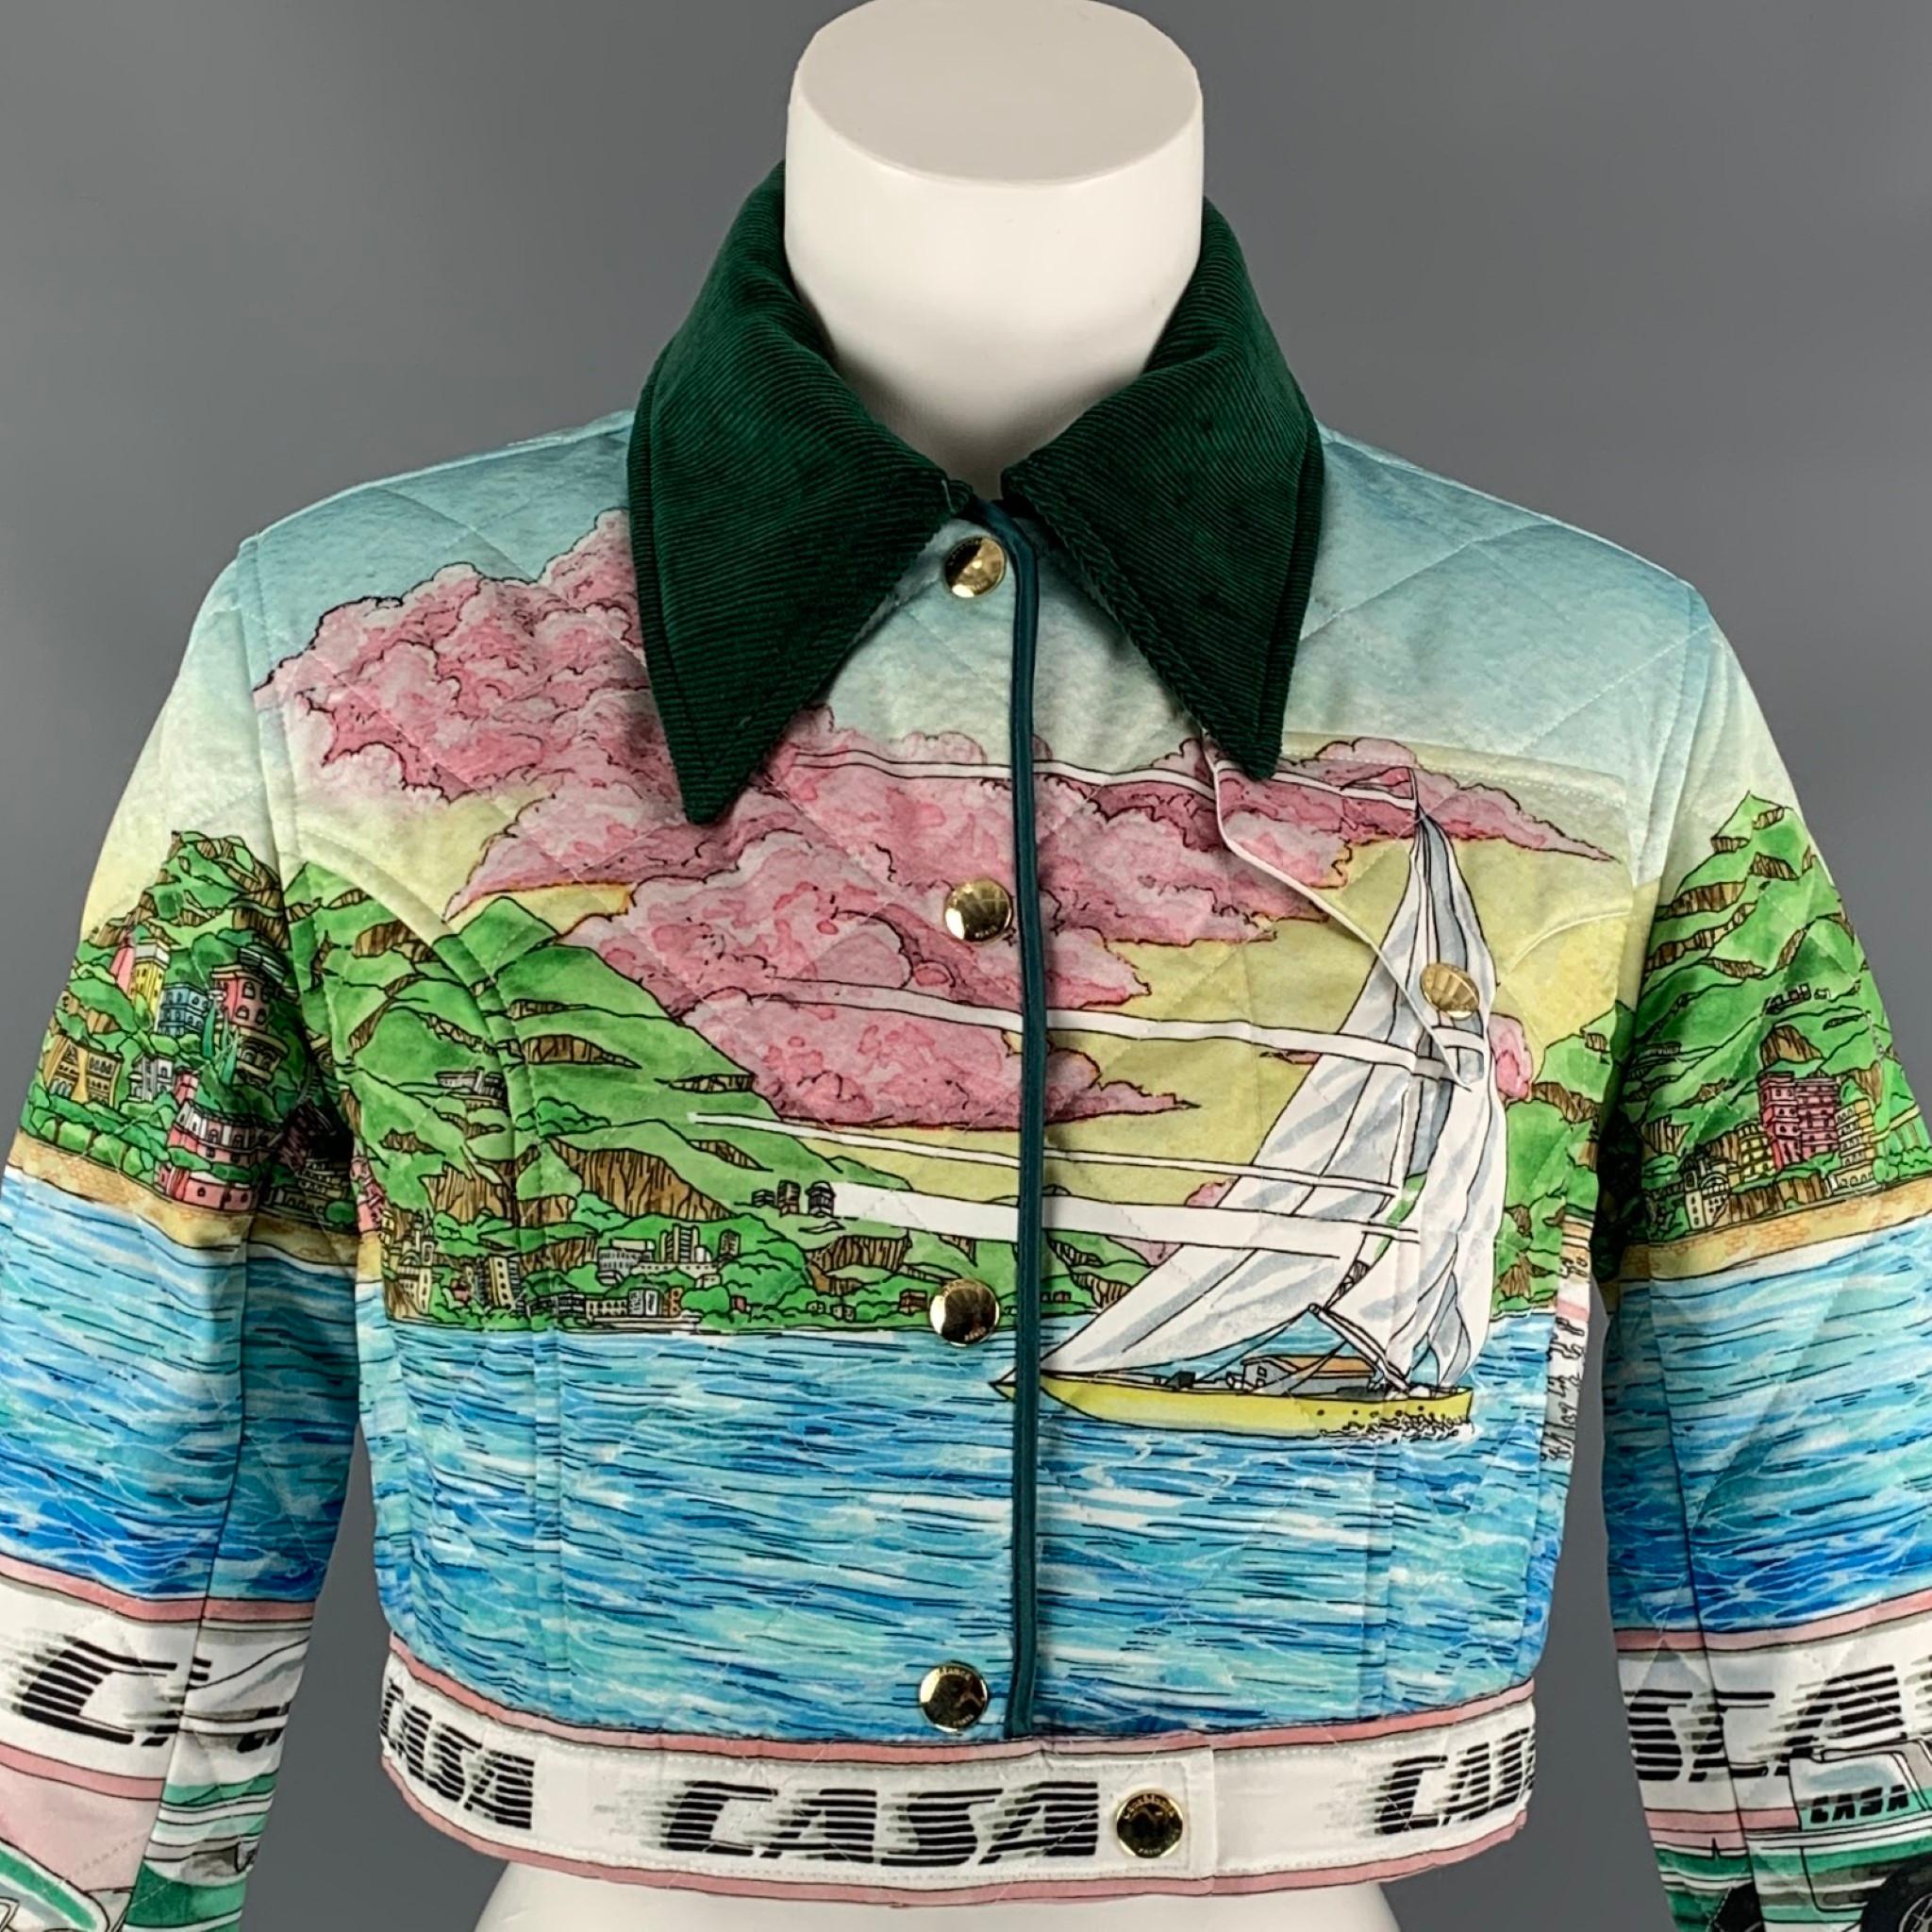 CASABLANCA jacket comes in a multi-color printed quilted satin with a full liner featuring race-ready graphics, gold popper fastenings, and a emerald green corduroy pointed collar and cuffs. Made in Italy.

Excellent Pre-Owned Condition.
Marked: